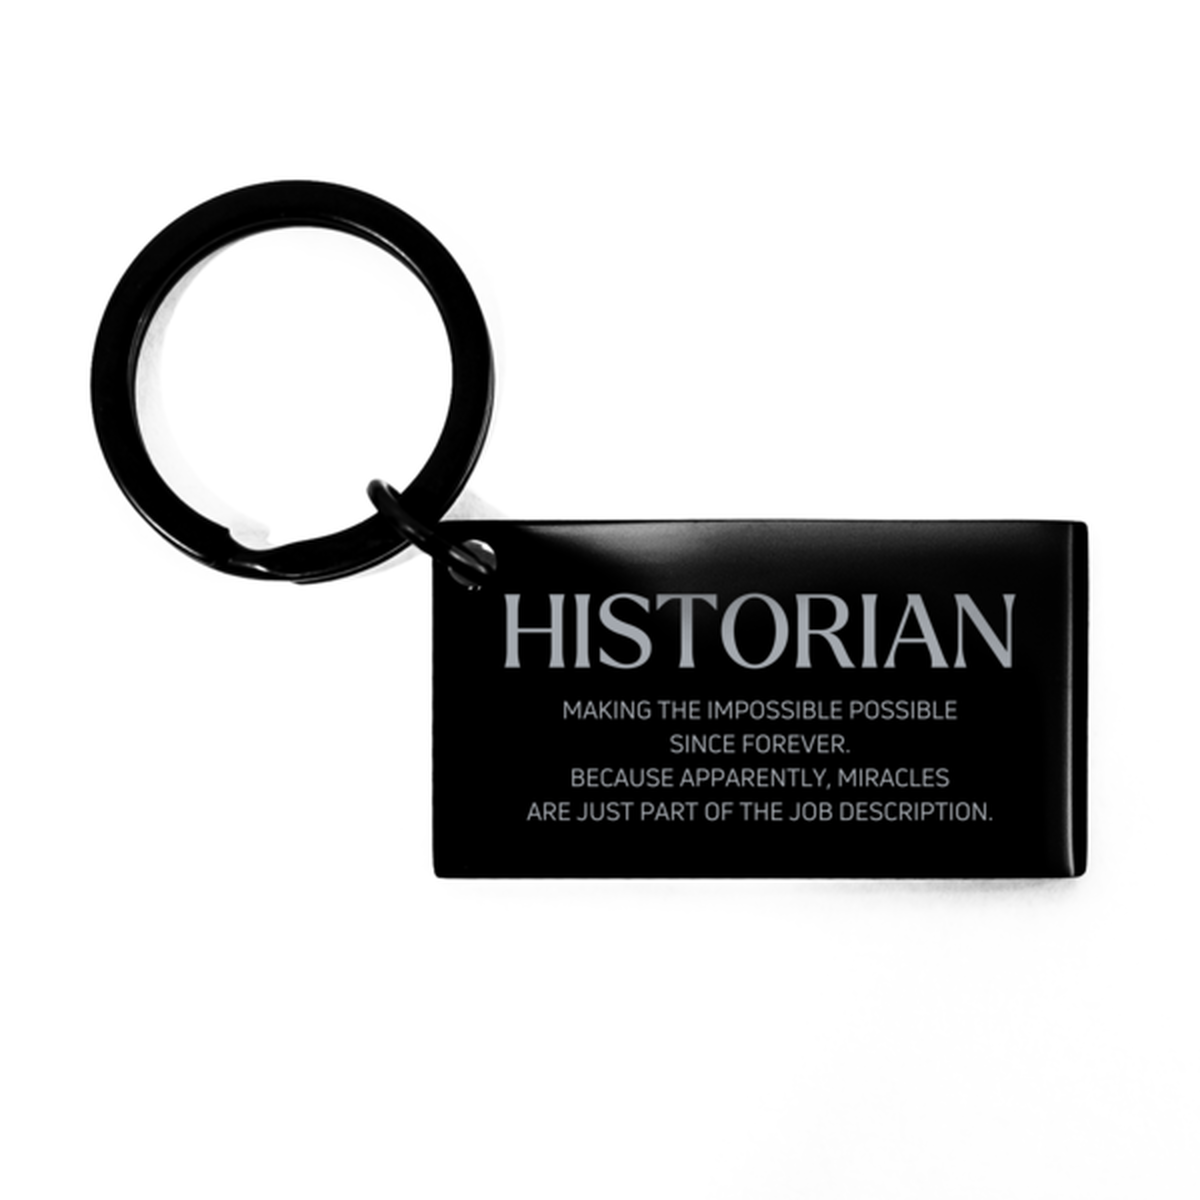 Funny Historian Gifts, Miracles are just part of the job description, Inspirational Birthday Keychain For Historian, Men, Women, Coworkers, Friends, Boss